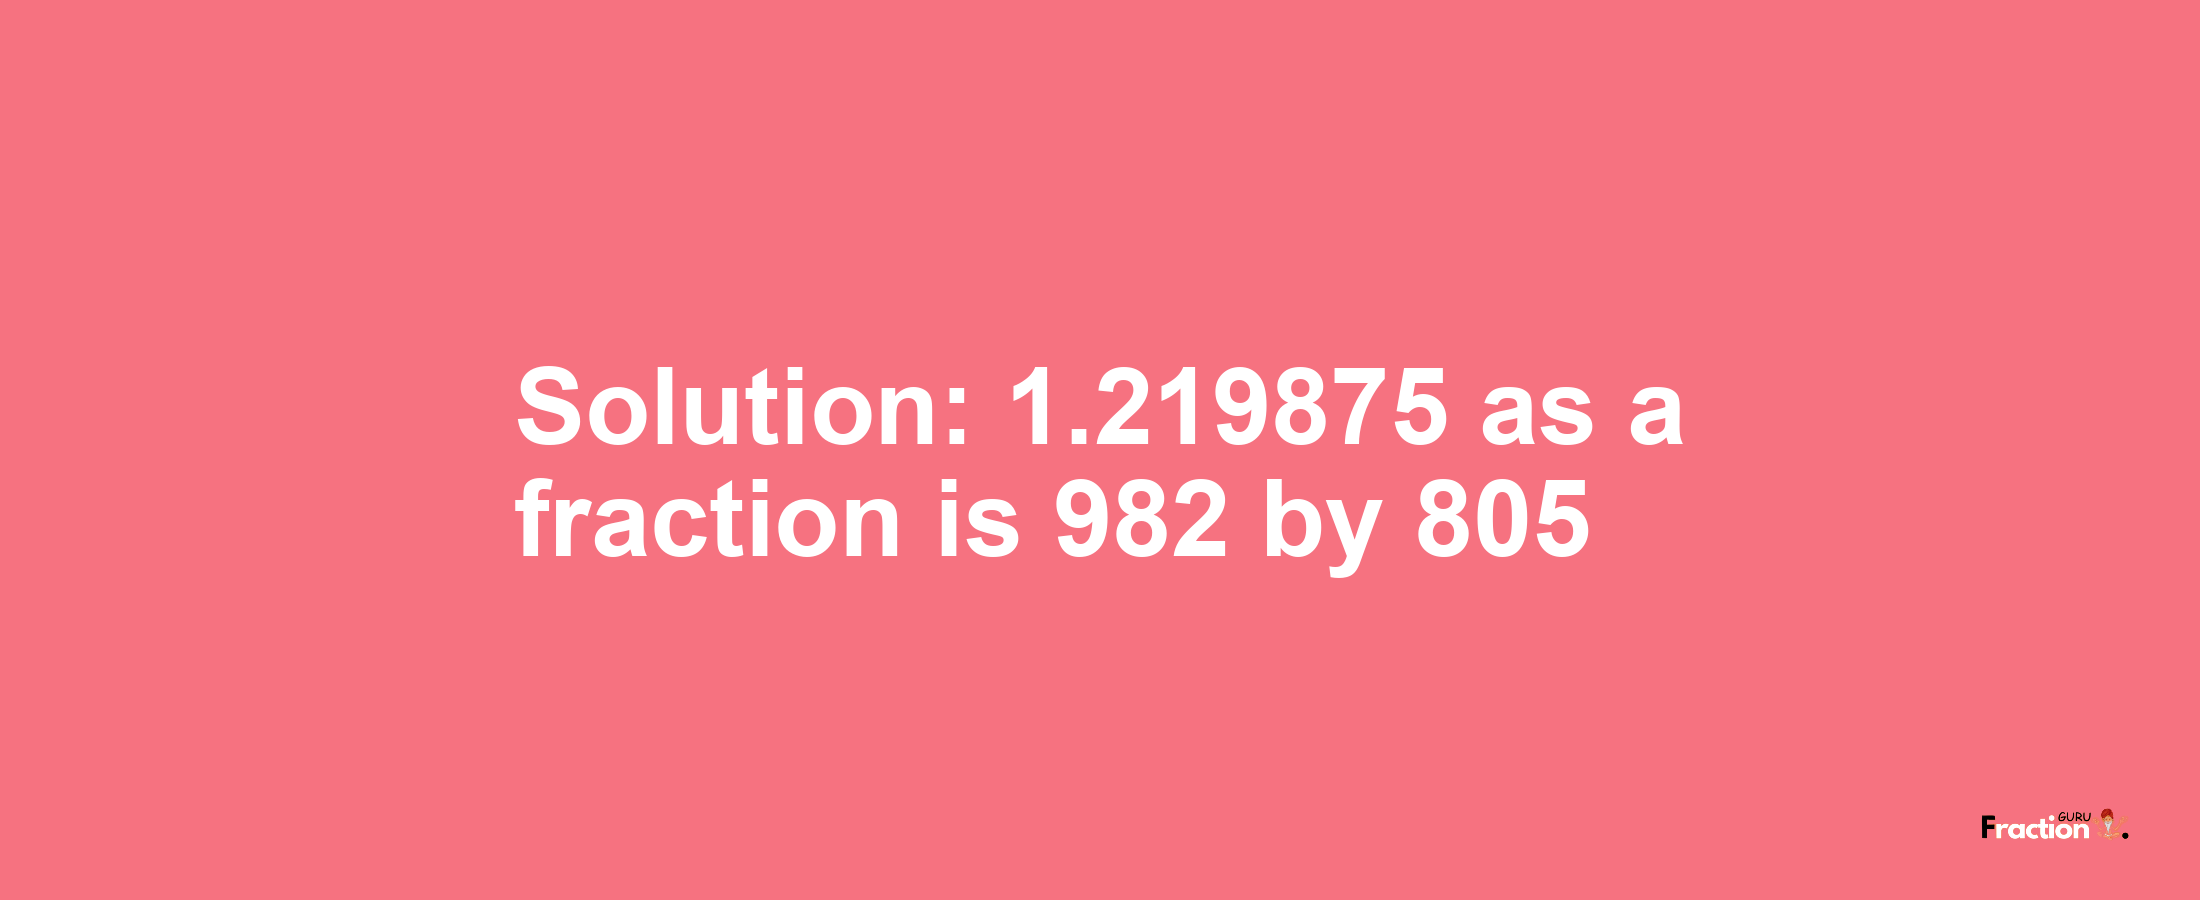 Solution:1.219875 as a fraction is 982/805